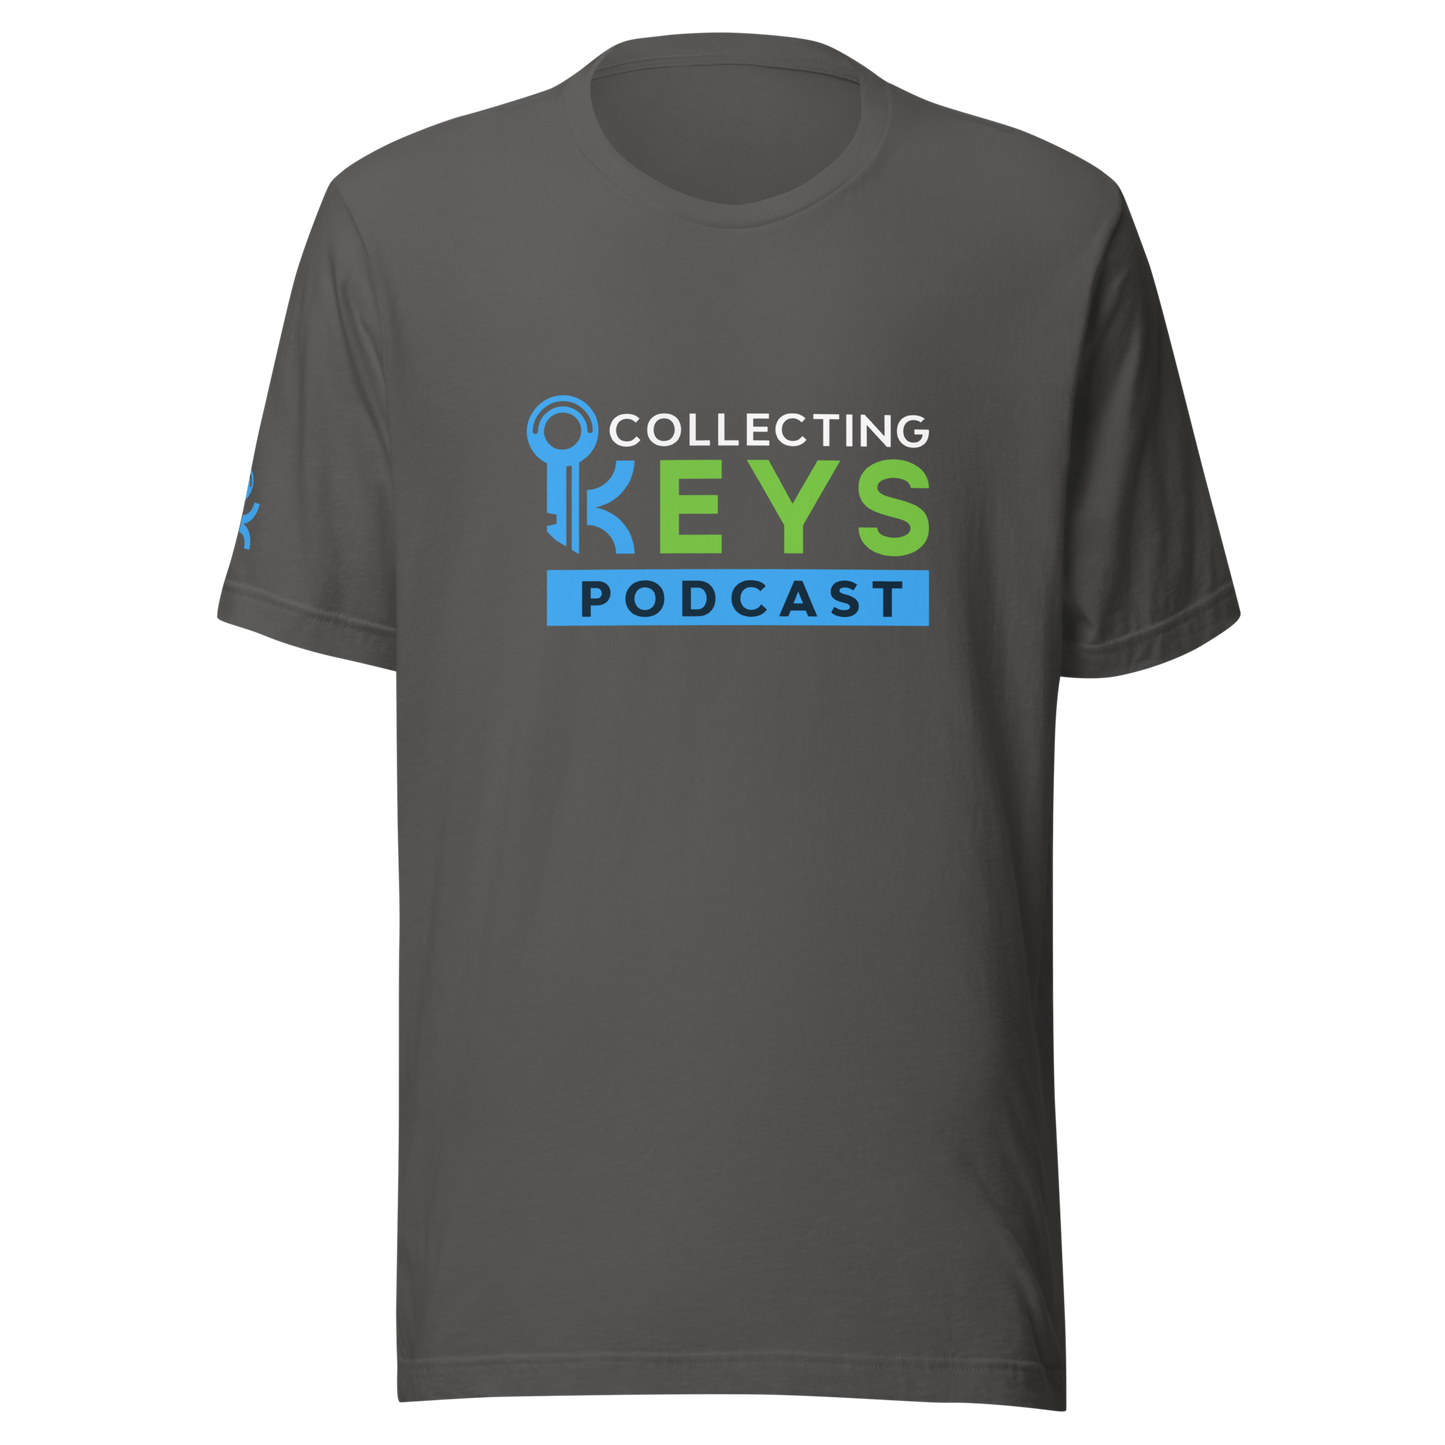 Collecting Keys Podcast - T-Shirt